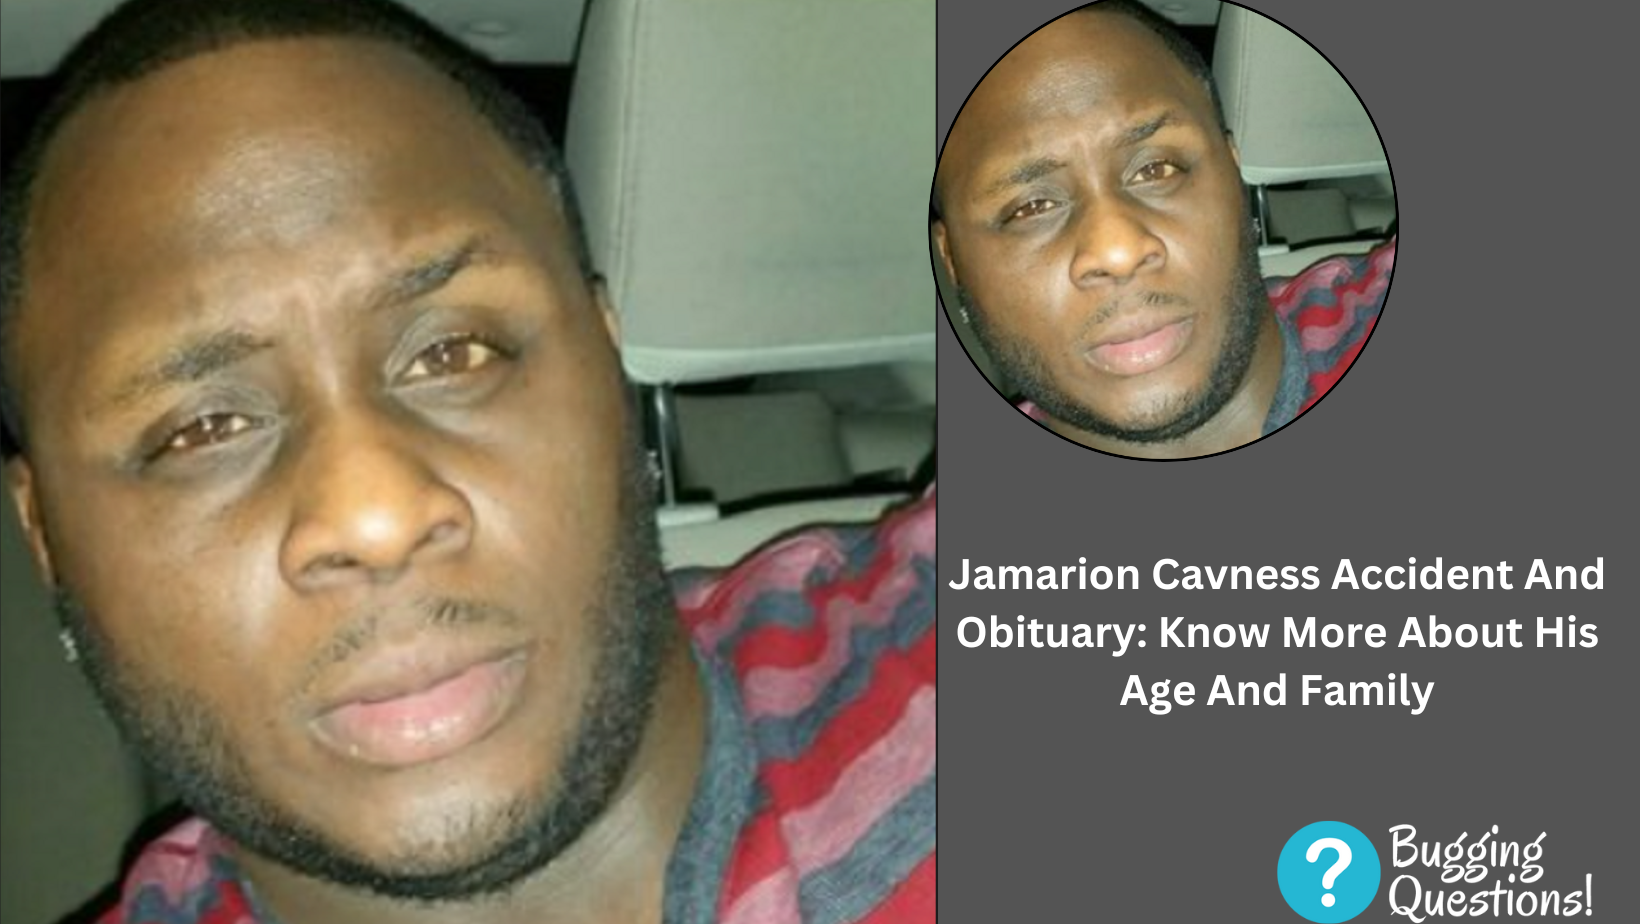 Jamarion Cavness Accident And Obituary